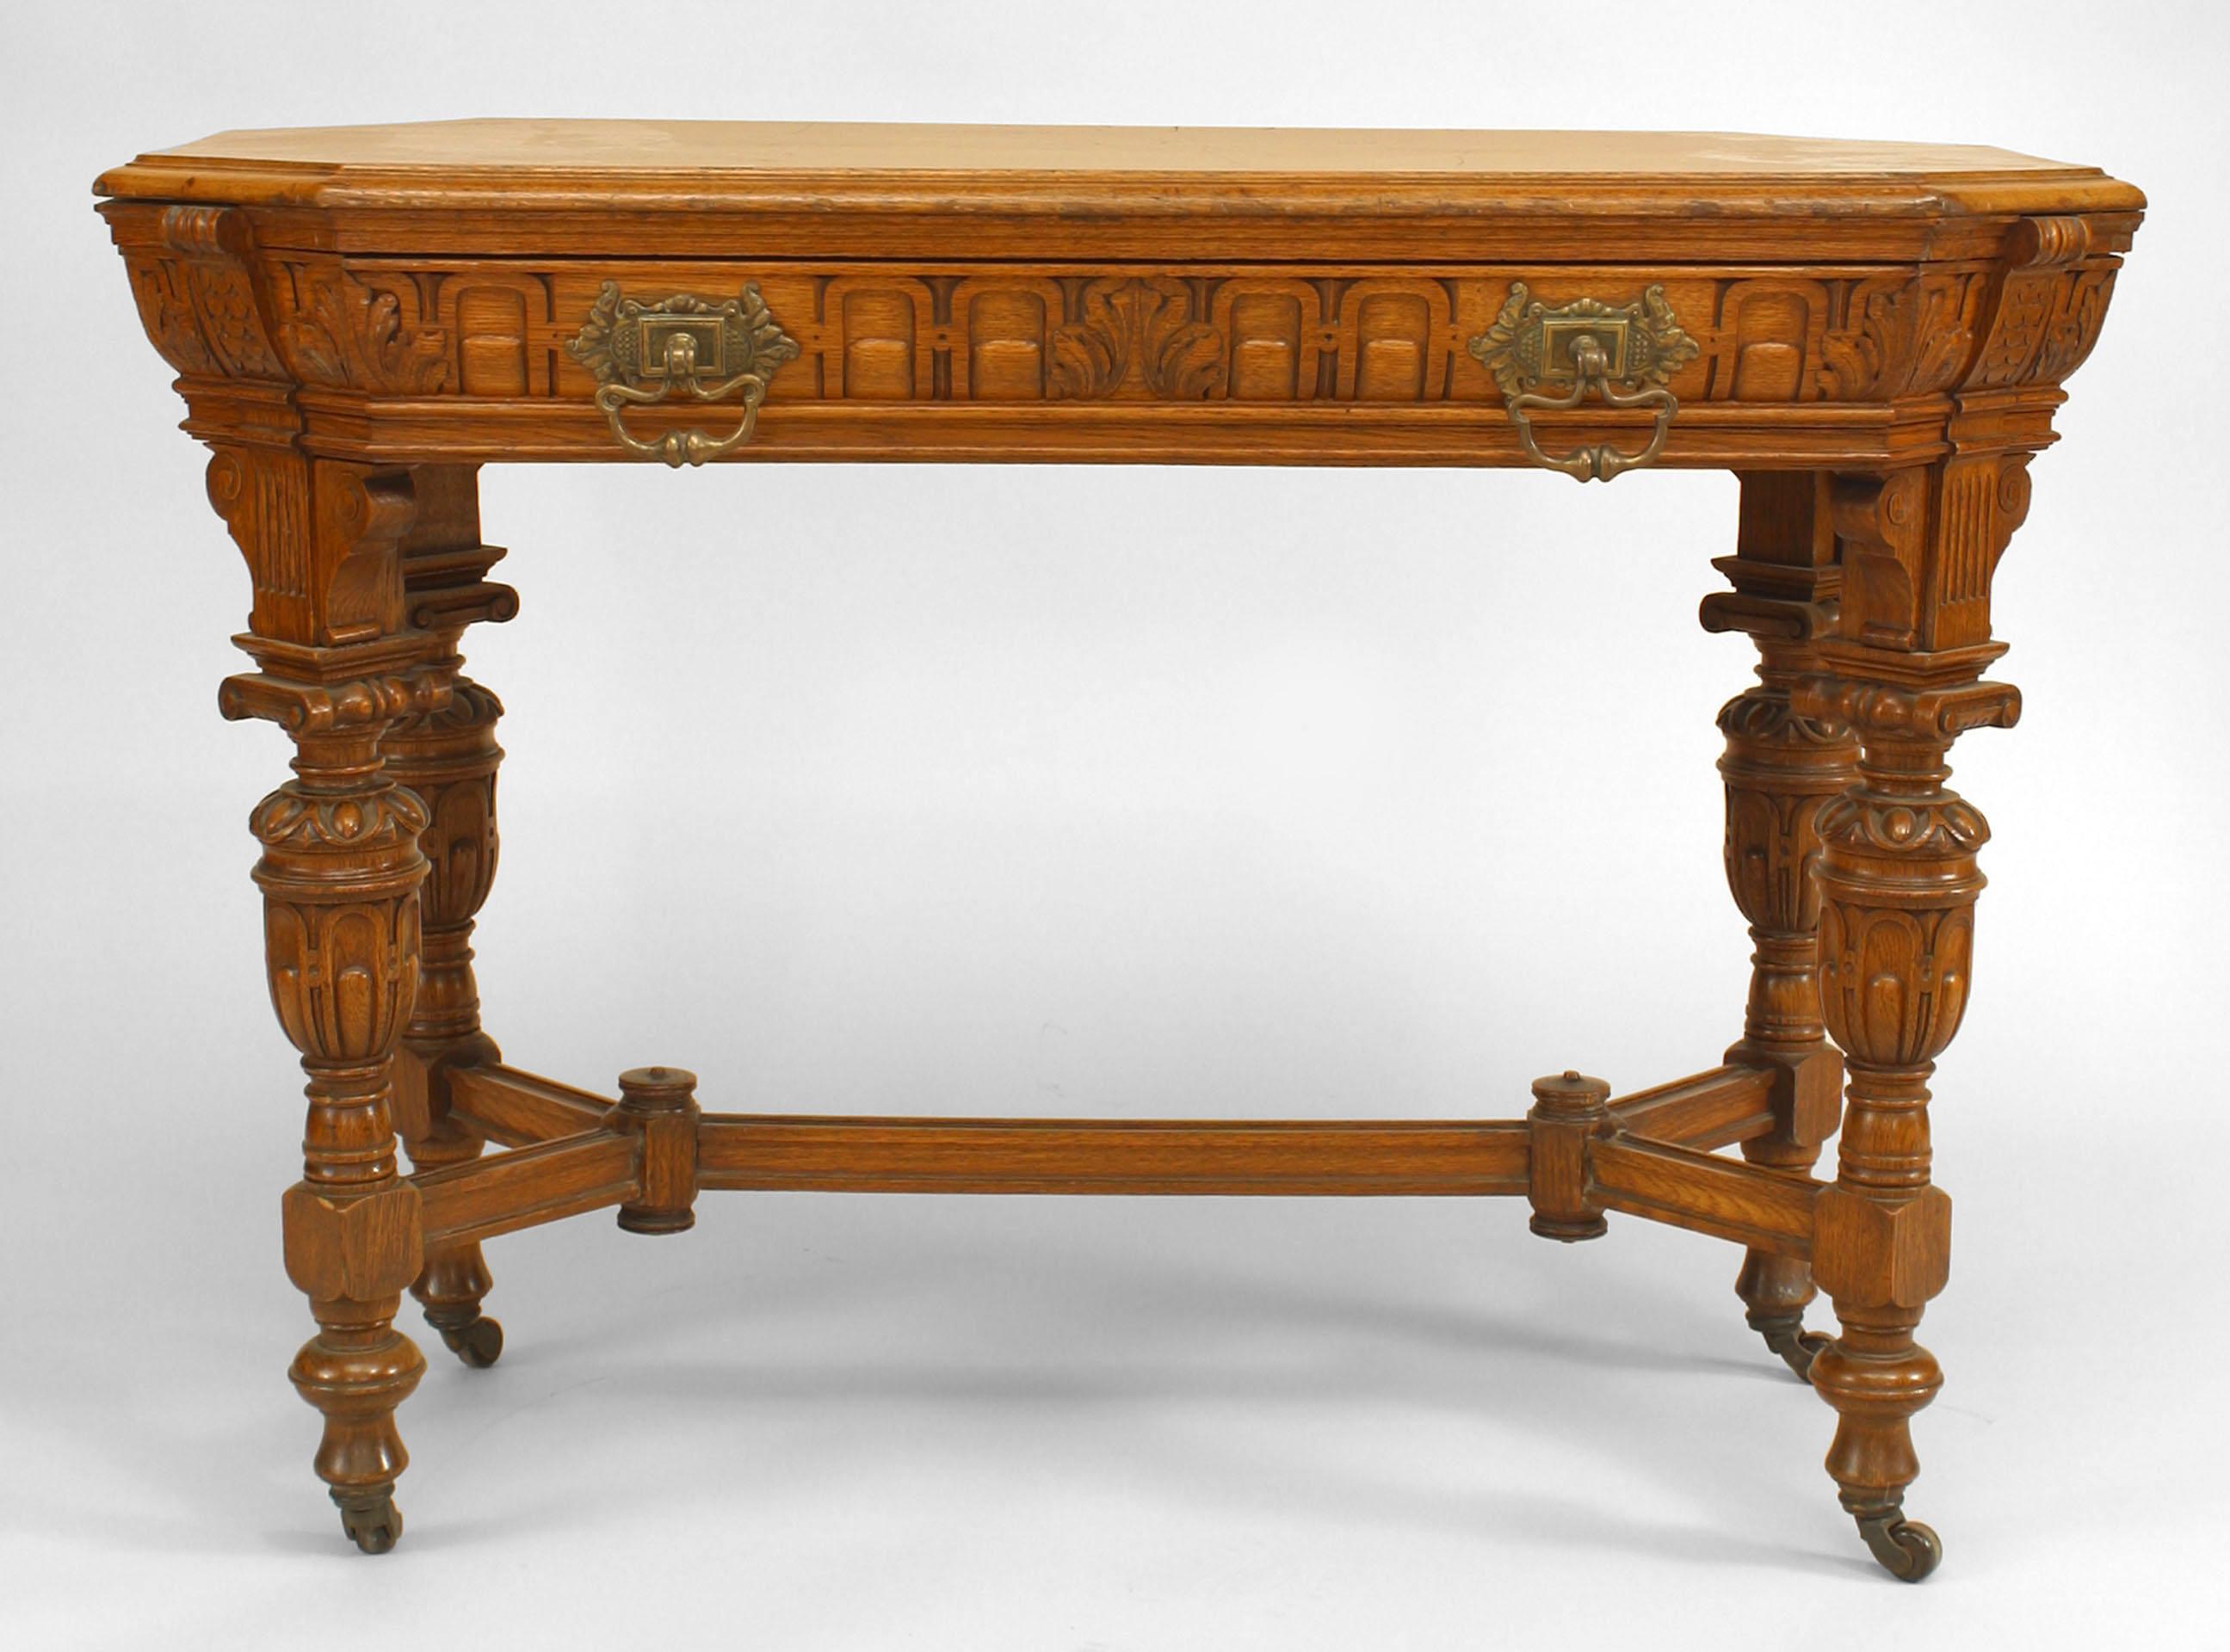 American Renaissance Revival Victorian golden oak end table with stretcher and drawer and 6 sided rectangular shaped top.
